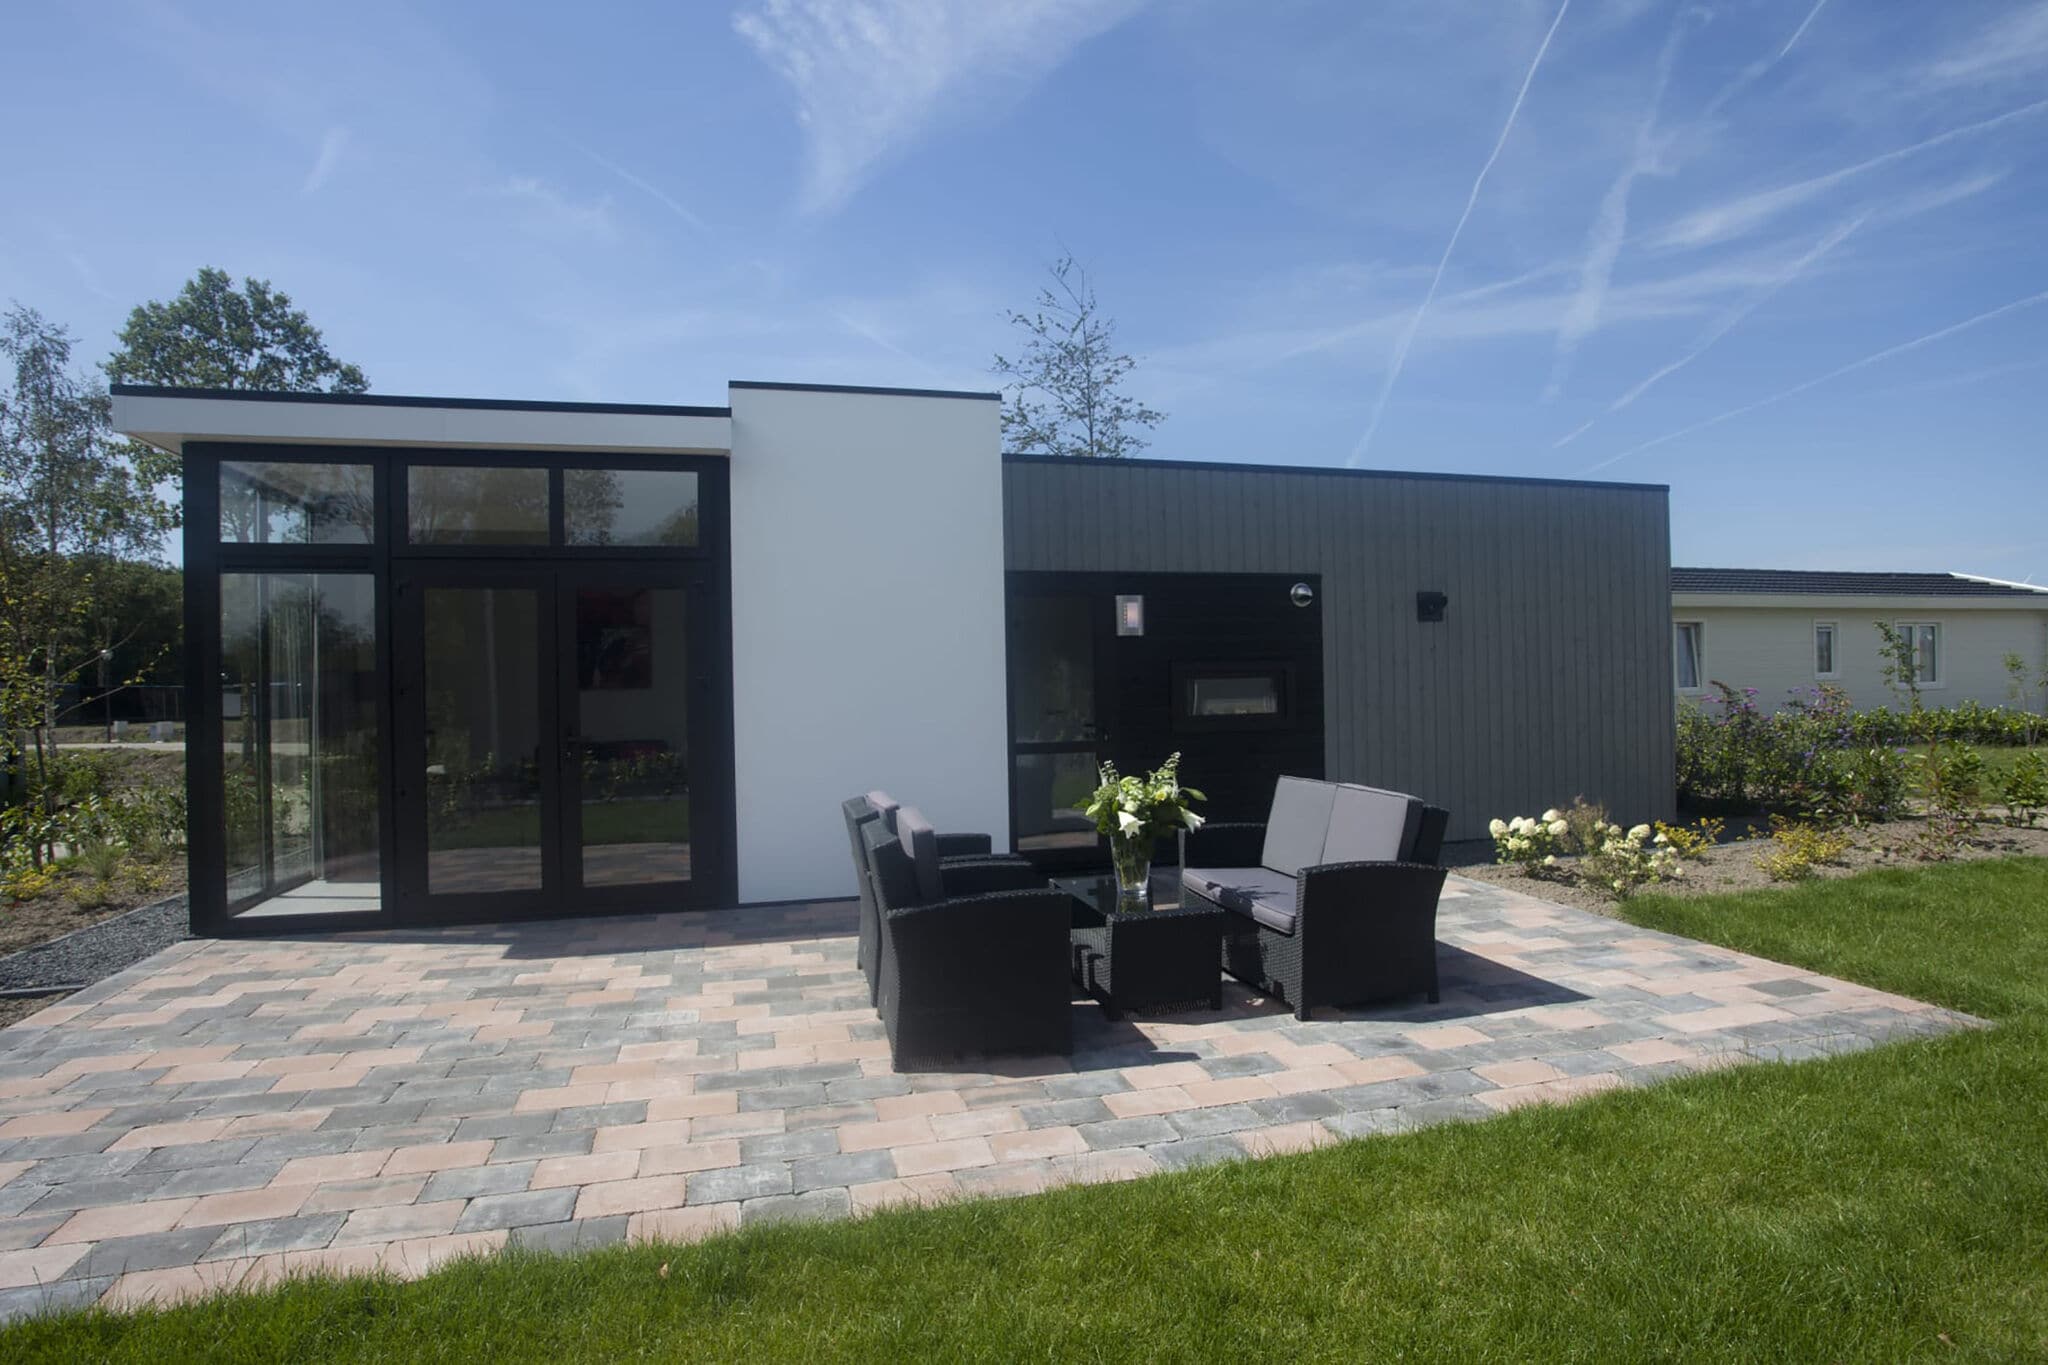 Modern holiday home near the golf course, in a holiday park, Amsterdam at 25 km.